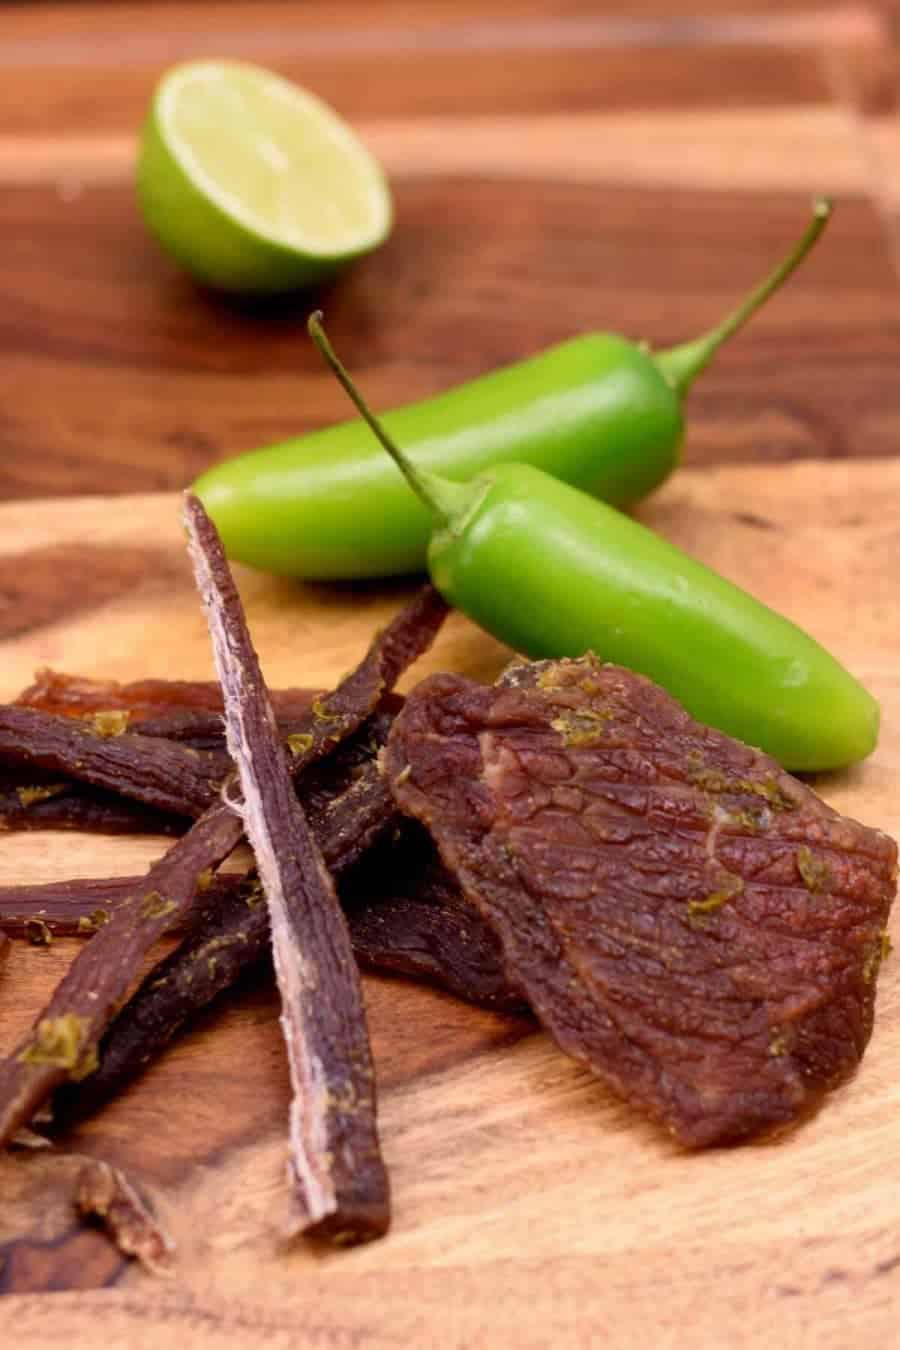 An easy to make jerky seasoned with a little spice from the jalapenos and delightful sourness from the limes | Jerkyholic.com